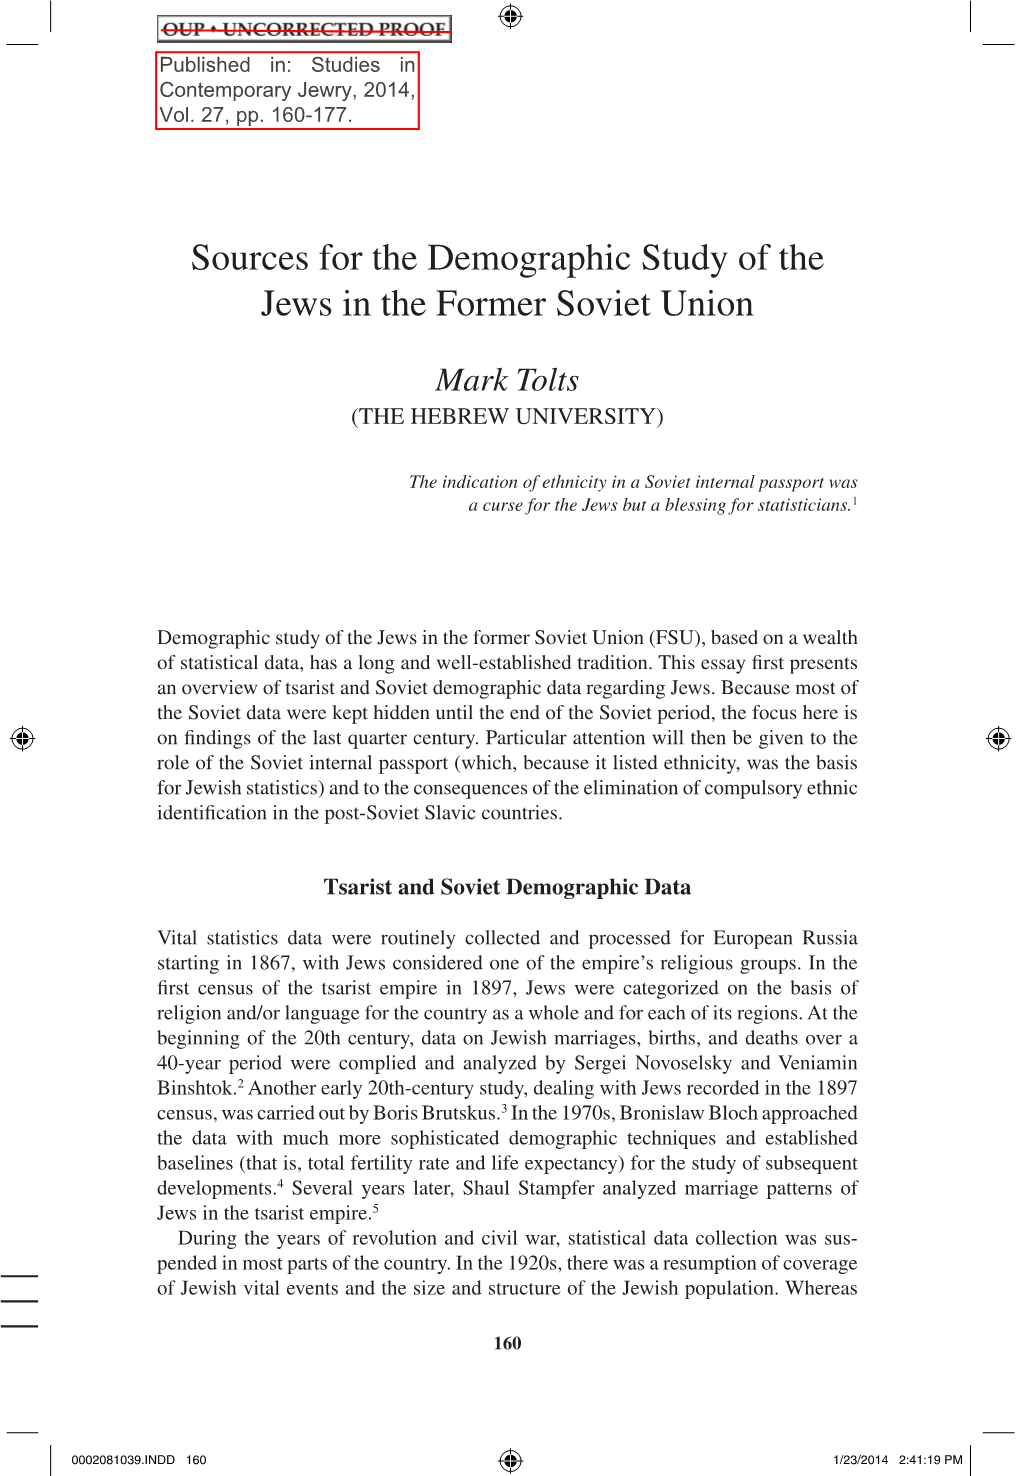 Sources for the Demographic Study of the Jews in the Former Soviet Union